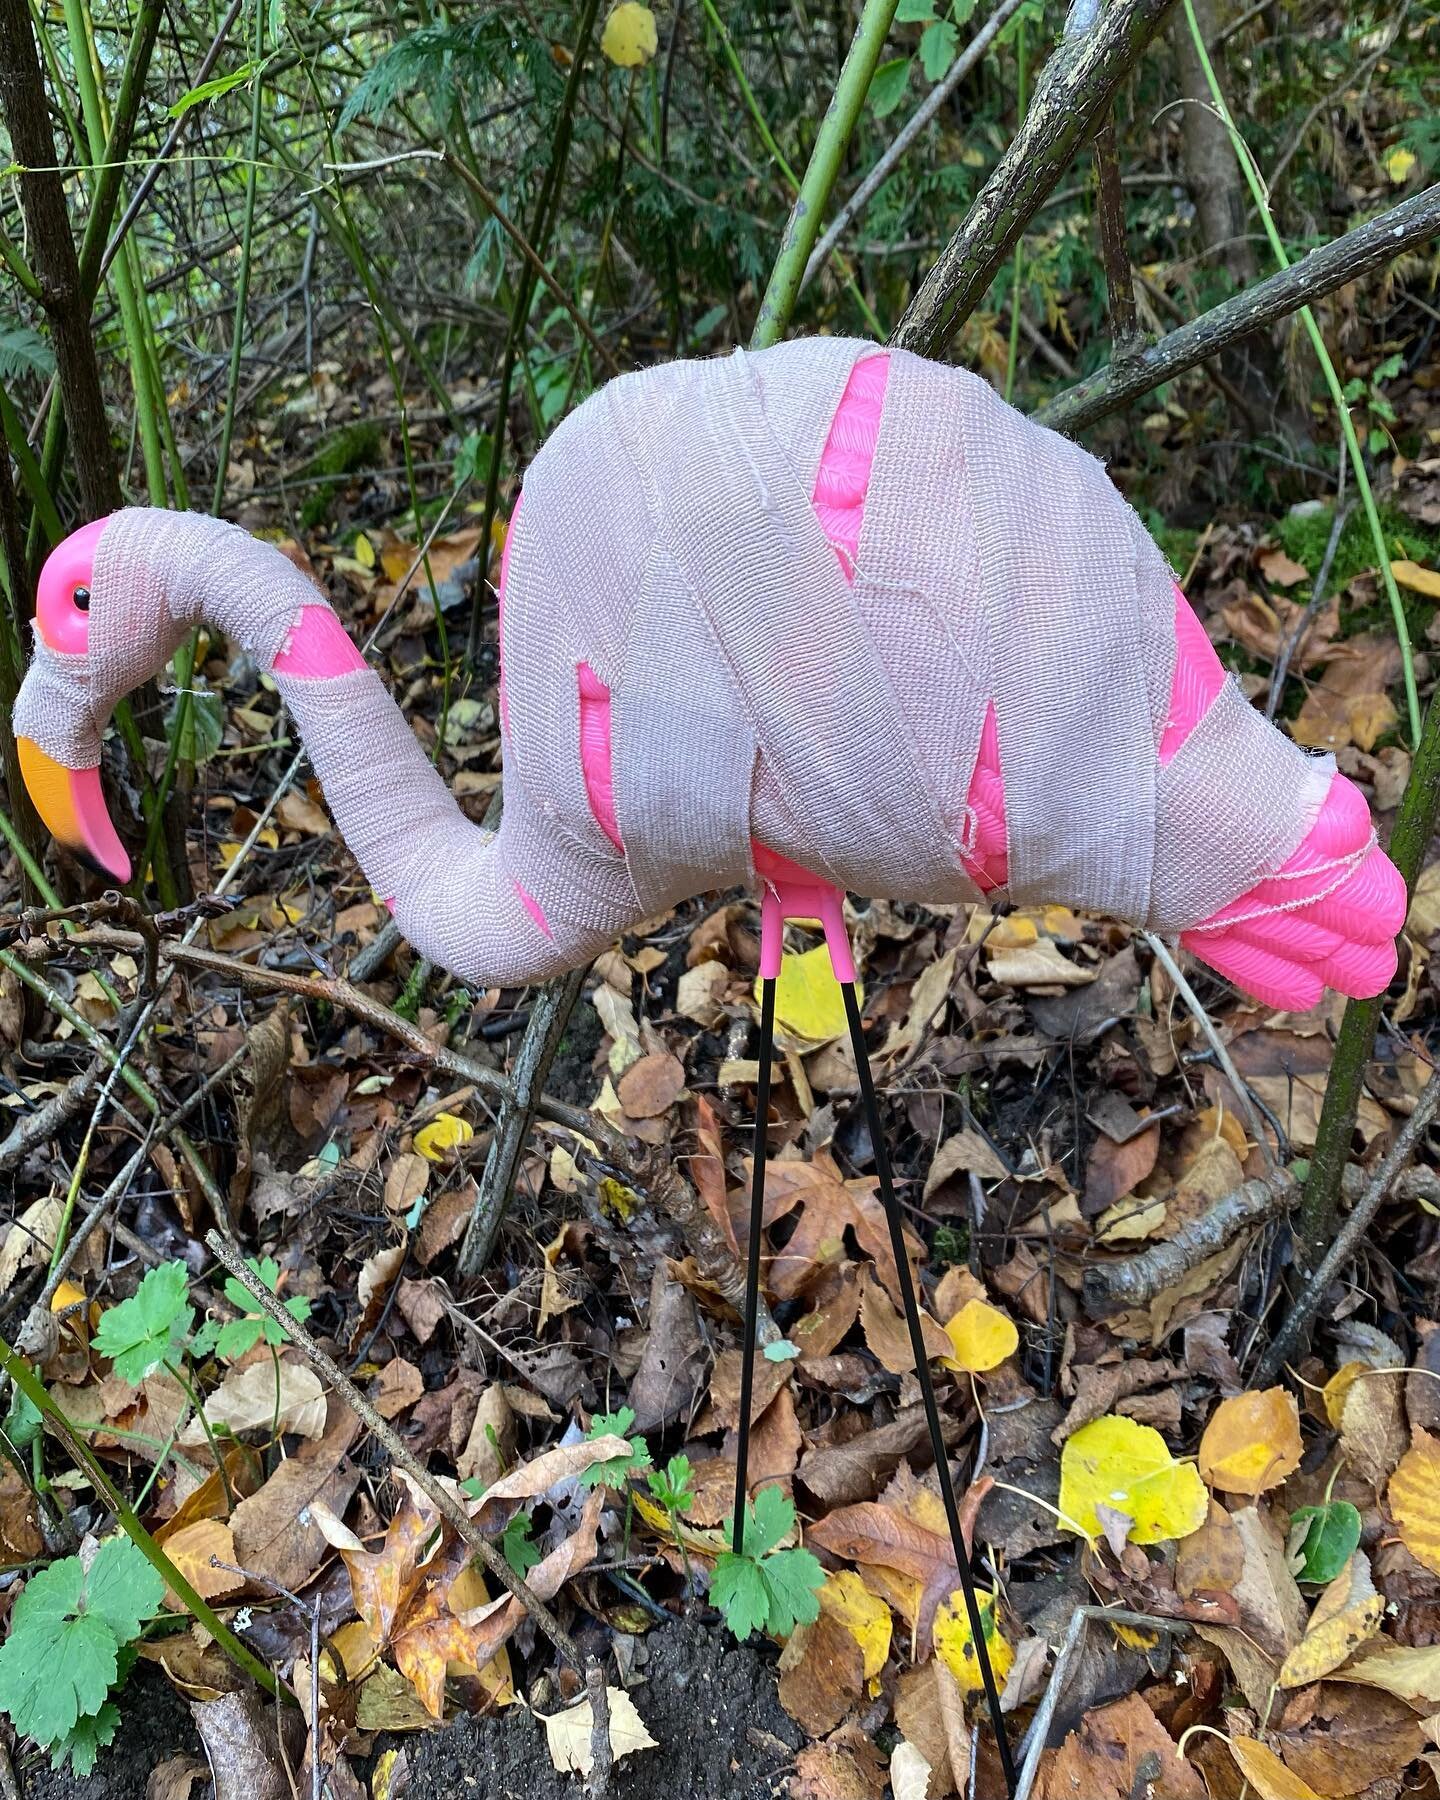 Halloween Haunt at the Zoo and the plastic flamingos were decked out!